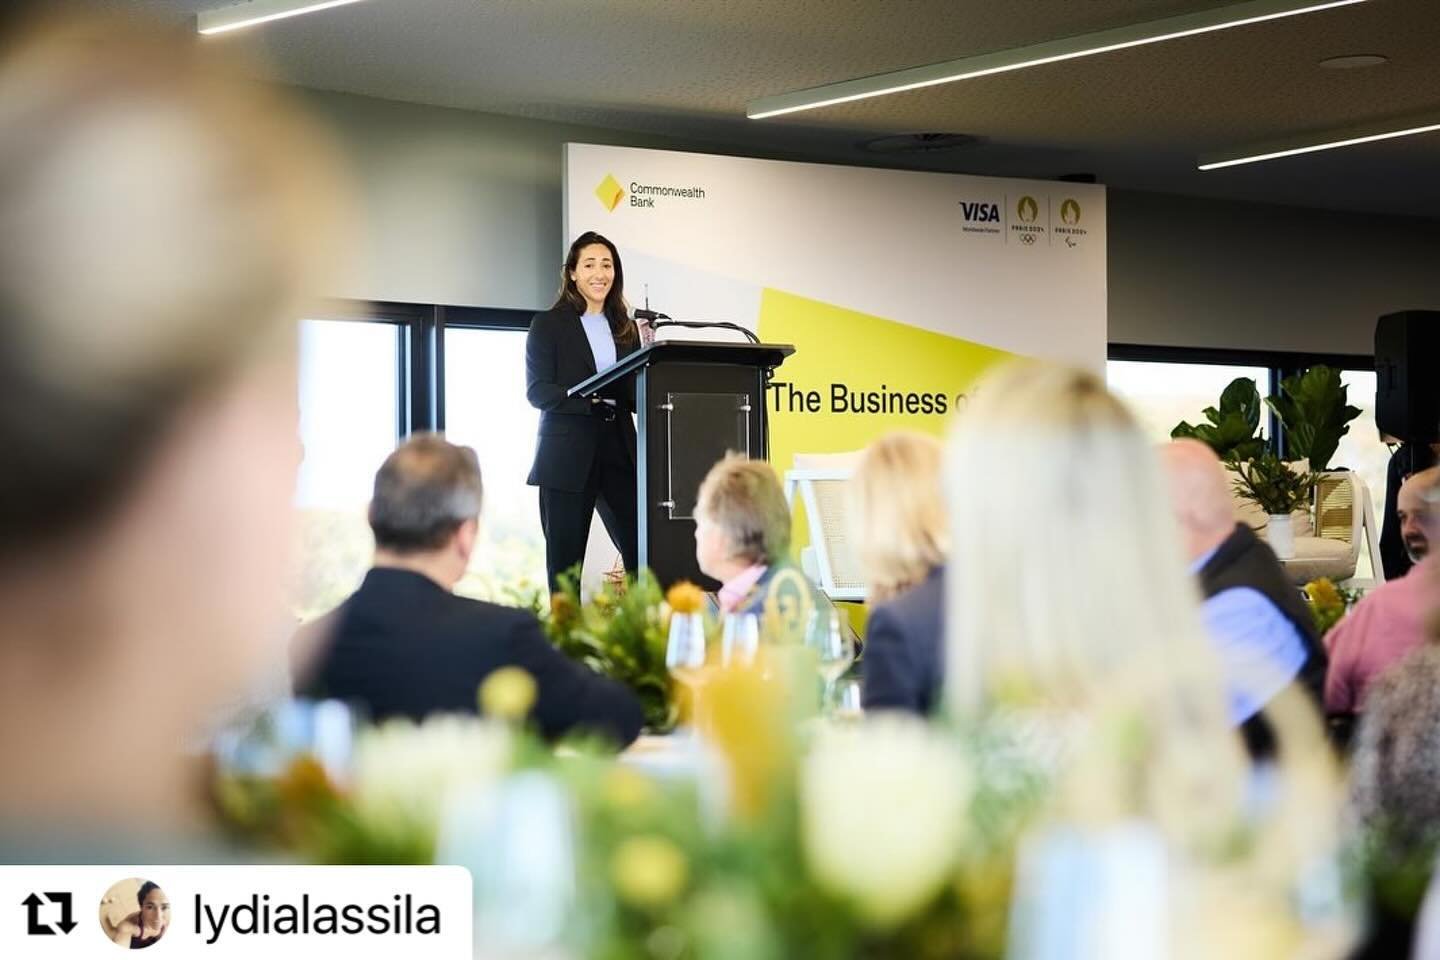 #Repost @lydialassila 
・・・
Had the pleasure of hosting the &lsquo;Business of Winning&rsquo; event in Warrnambool, thanks to Visa and their long standing partnership with the Olympics Games. 🏆
Amazing conversations and stories shared with Olympic ch